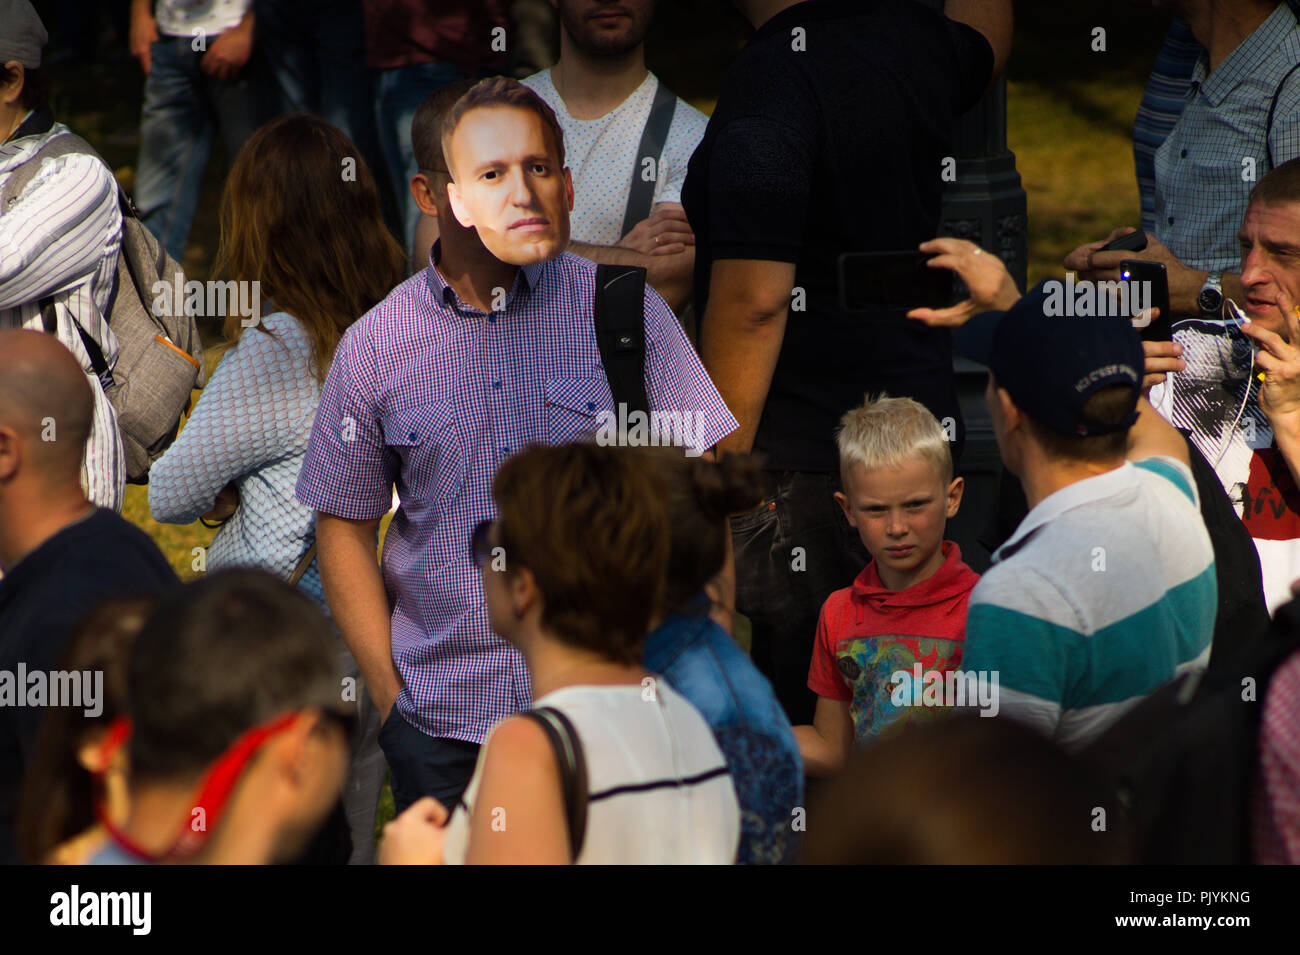 Moscow, Russia. 9th Sept 2018. Man shows support for Russian opposition leader Alexei Navalny by wearing a Navalny-mask during anti-government rally in Moscow where activists gathered to express resentment about the upcoming pension refrom. Credit: Roman Chukanov/Alamy Live News Stock Photo